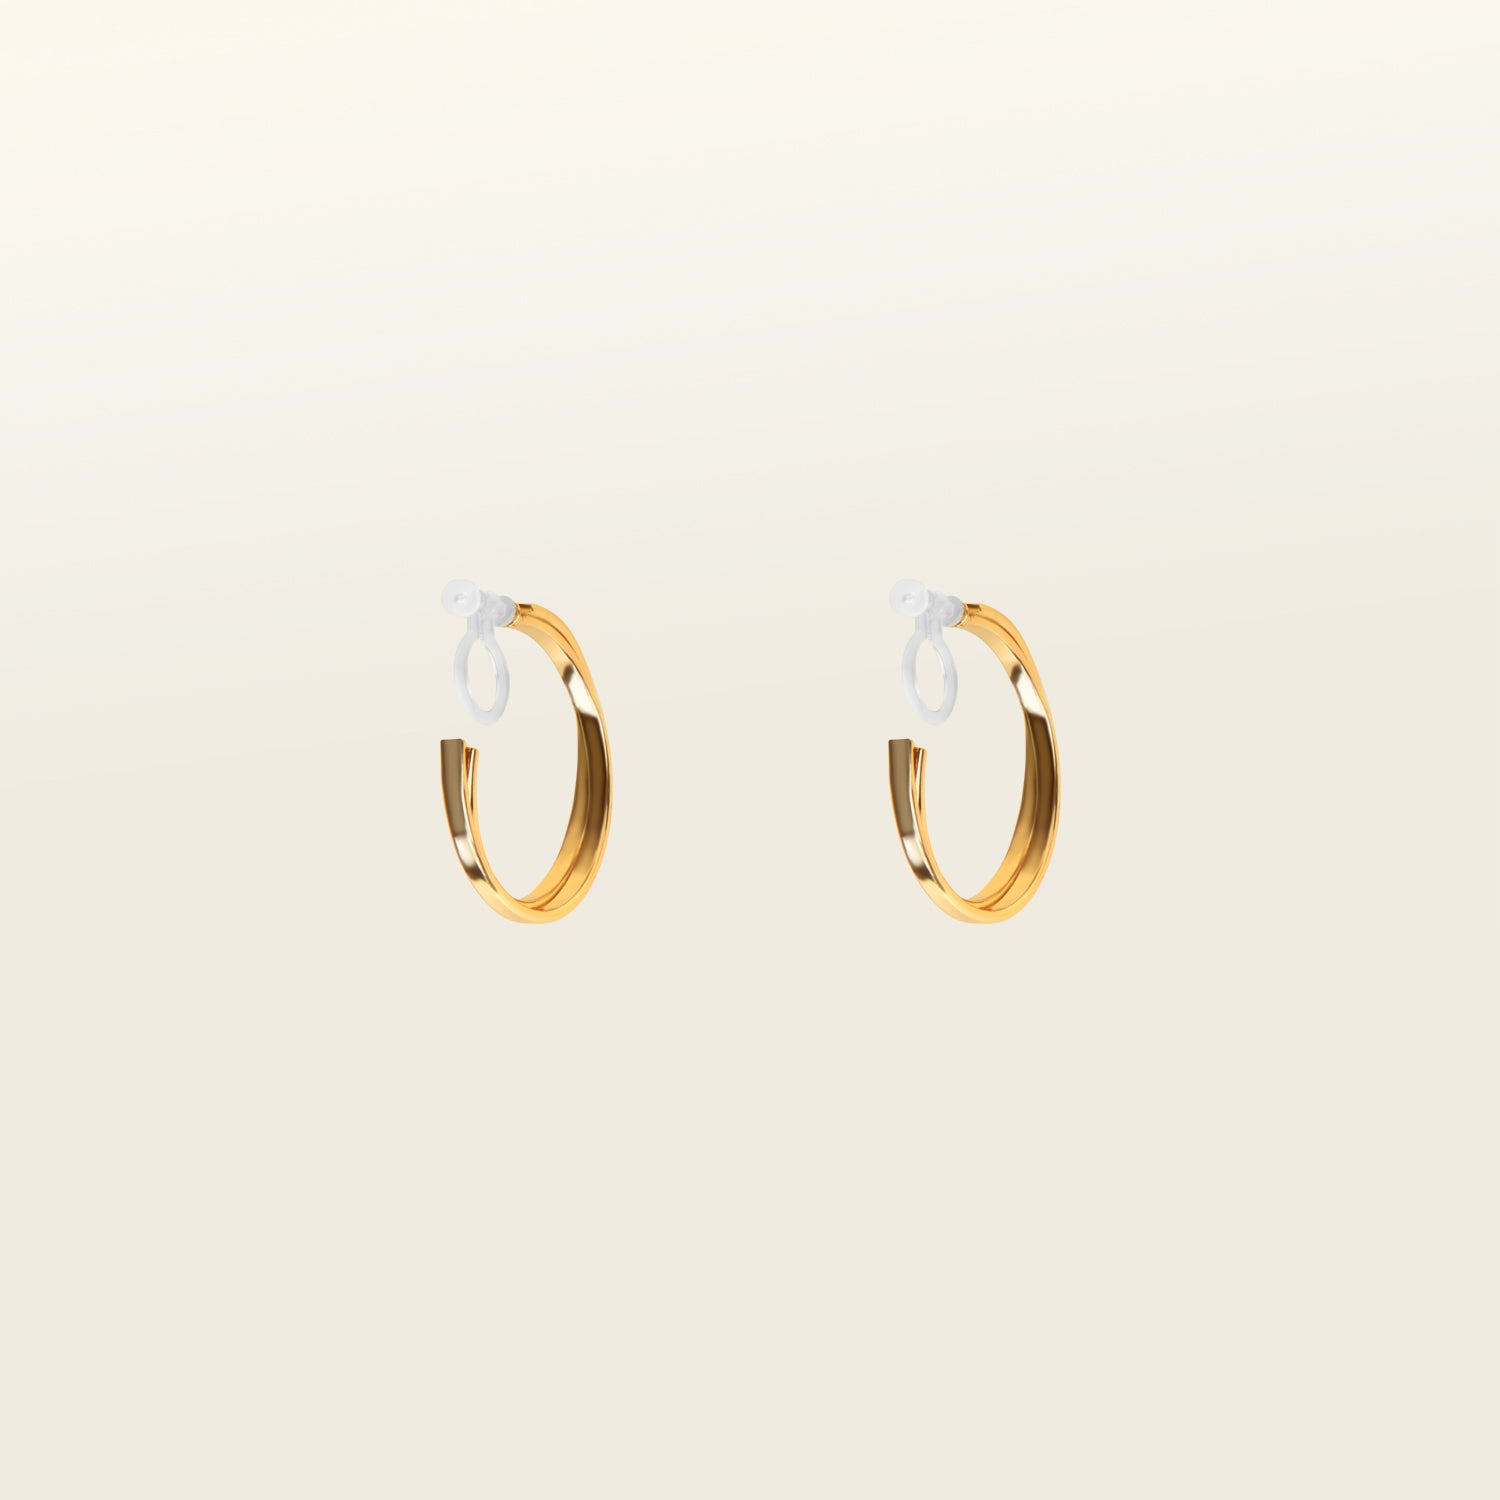 Image of the Gold Cassie Hoop Clip-On Earrings feature a resin closure, making them ideal for all ear types, including thick/large ears, sensitive ears, small/thin ears, and stretched/healing ears. On average, pairs are comfortably worn for 8-12 hours with a medium secure hold, and they are not adjustable. This item is sold as a single pair and is also available in Silver. The earrings are constructed with gold-tone metal alloy.